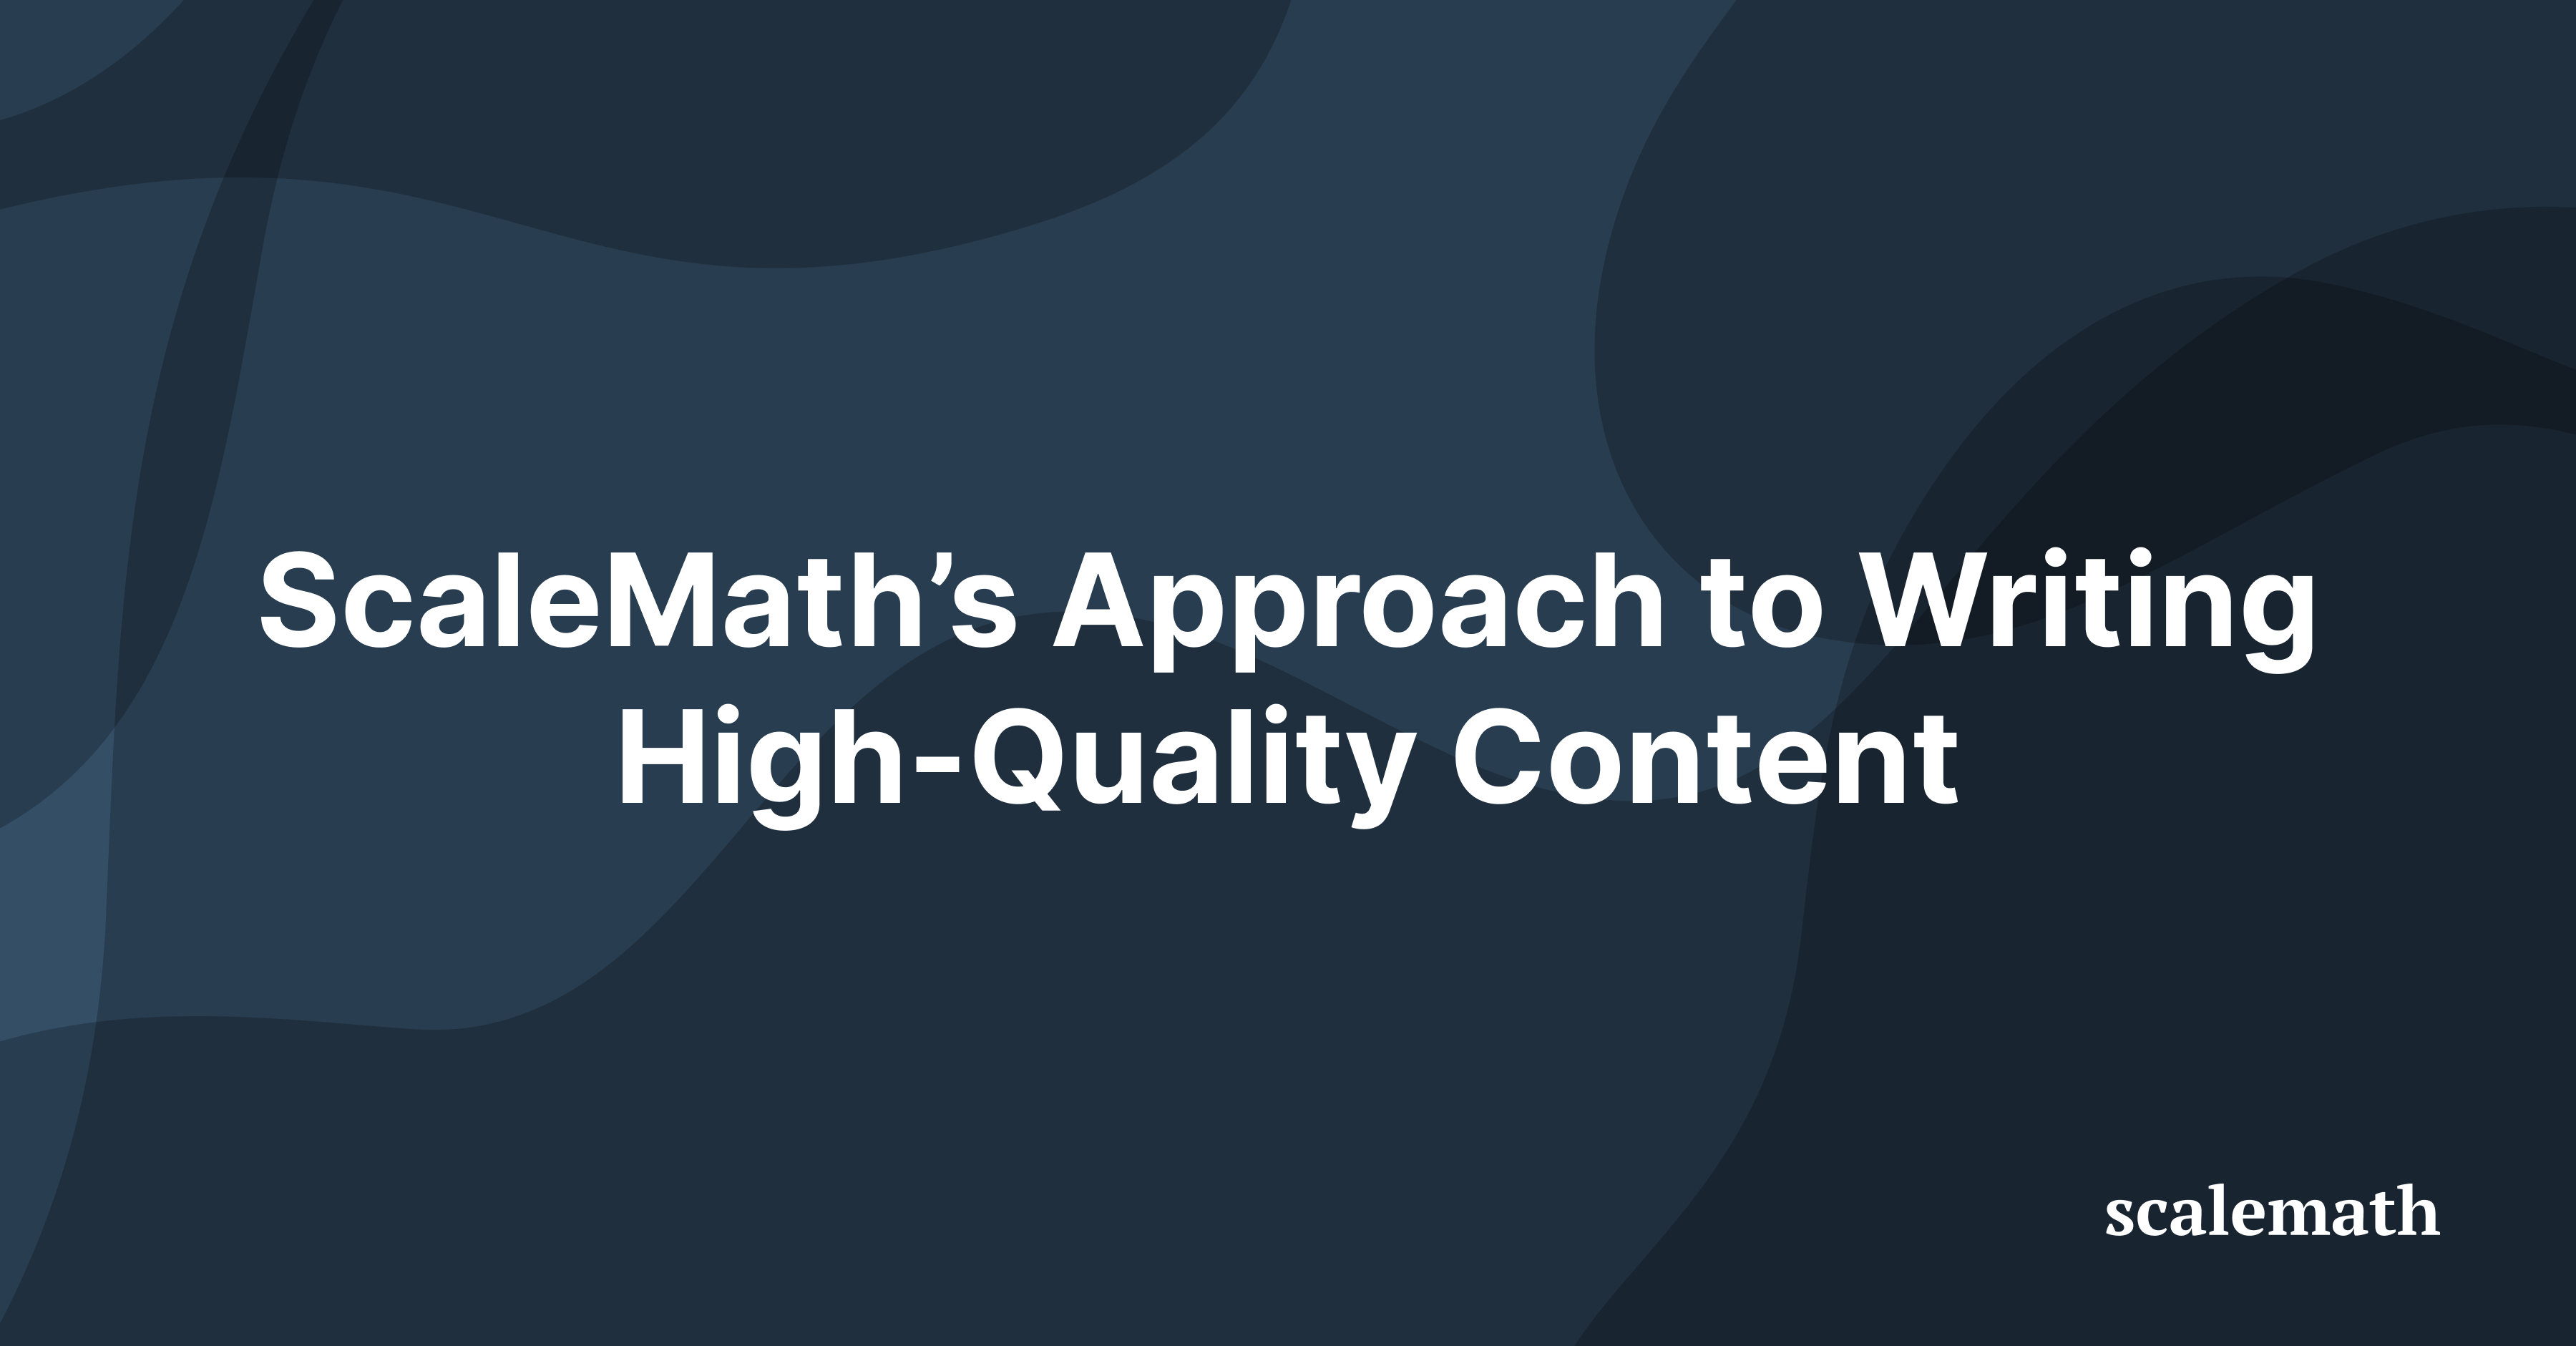 ScaleMath’s Approach to Writing High-Quality Content